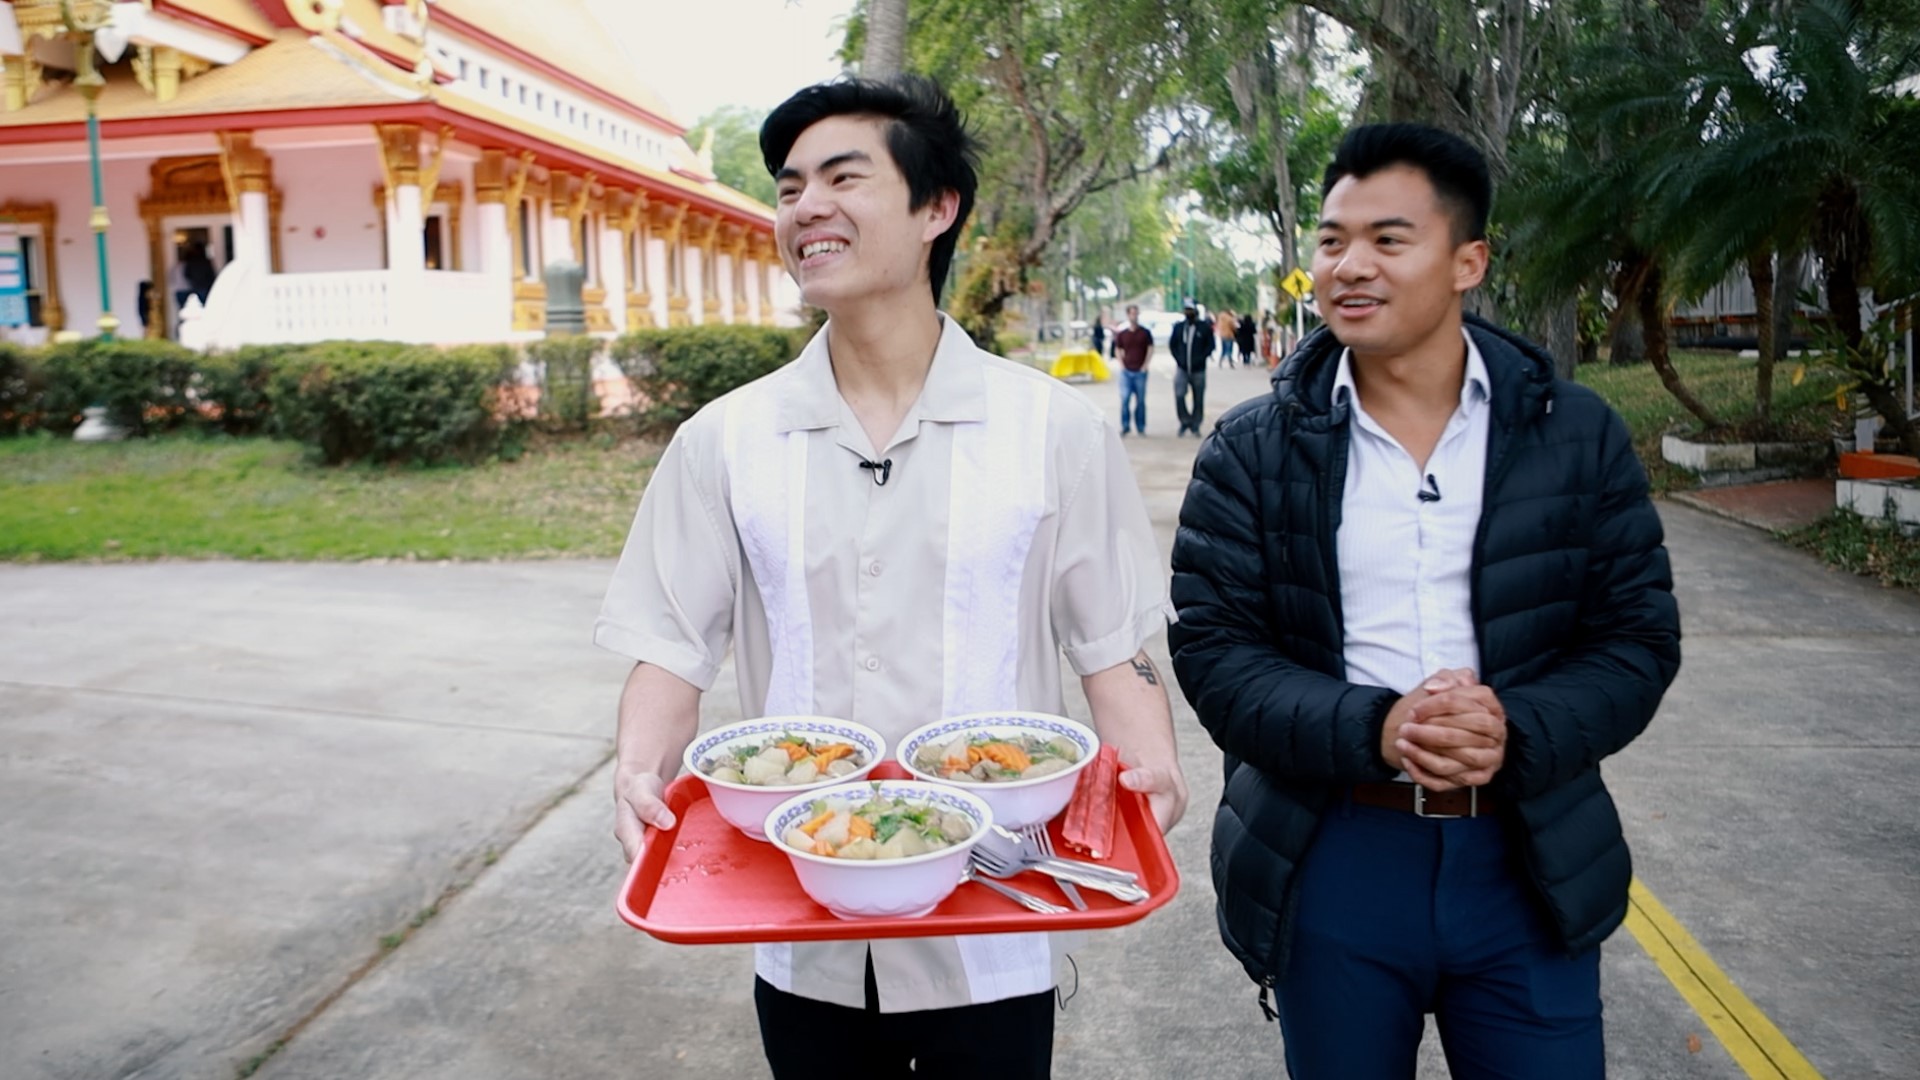 For more than 30 years, visitors flock to Wat Tampa, a Buddhist Thai temple, for the culture and the food during its Sunday markets.